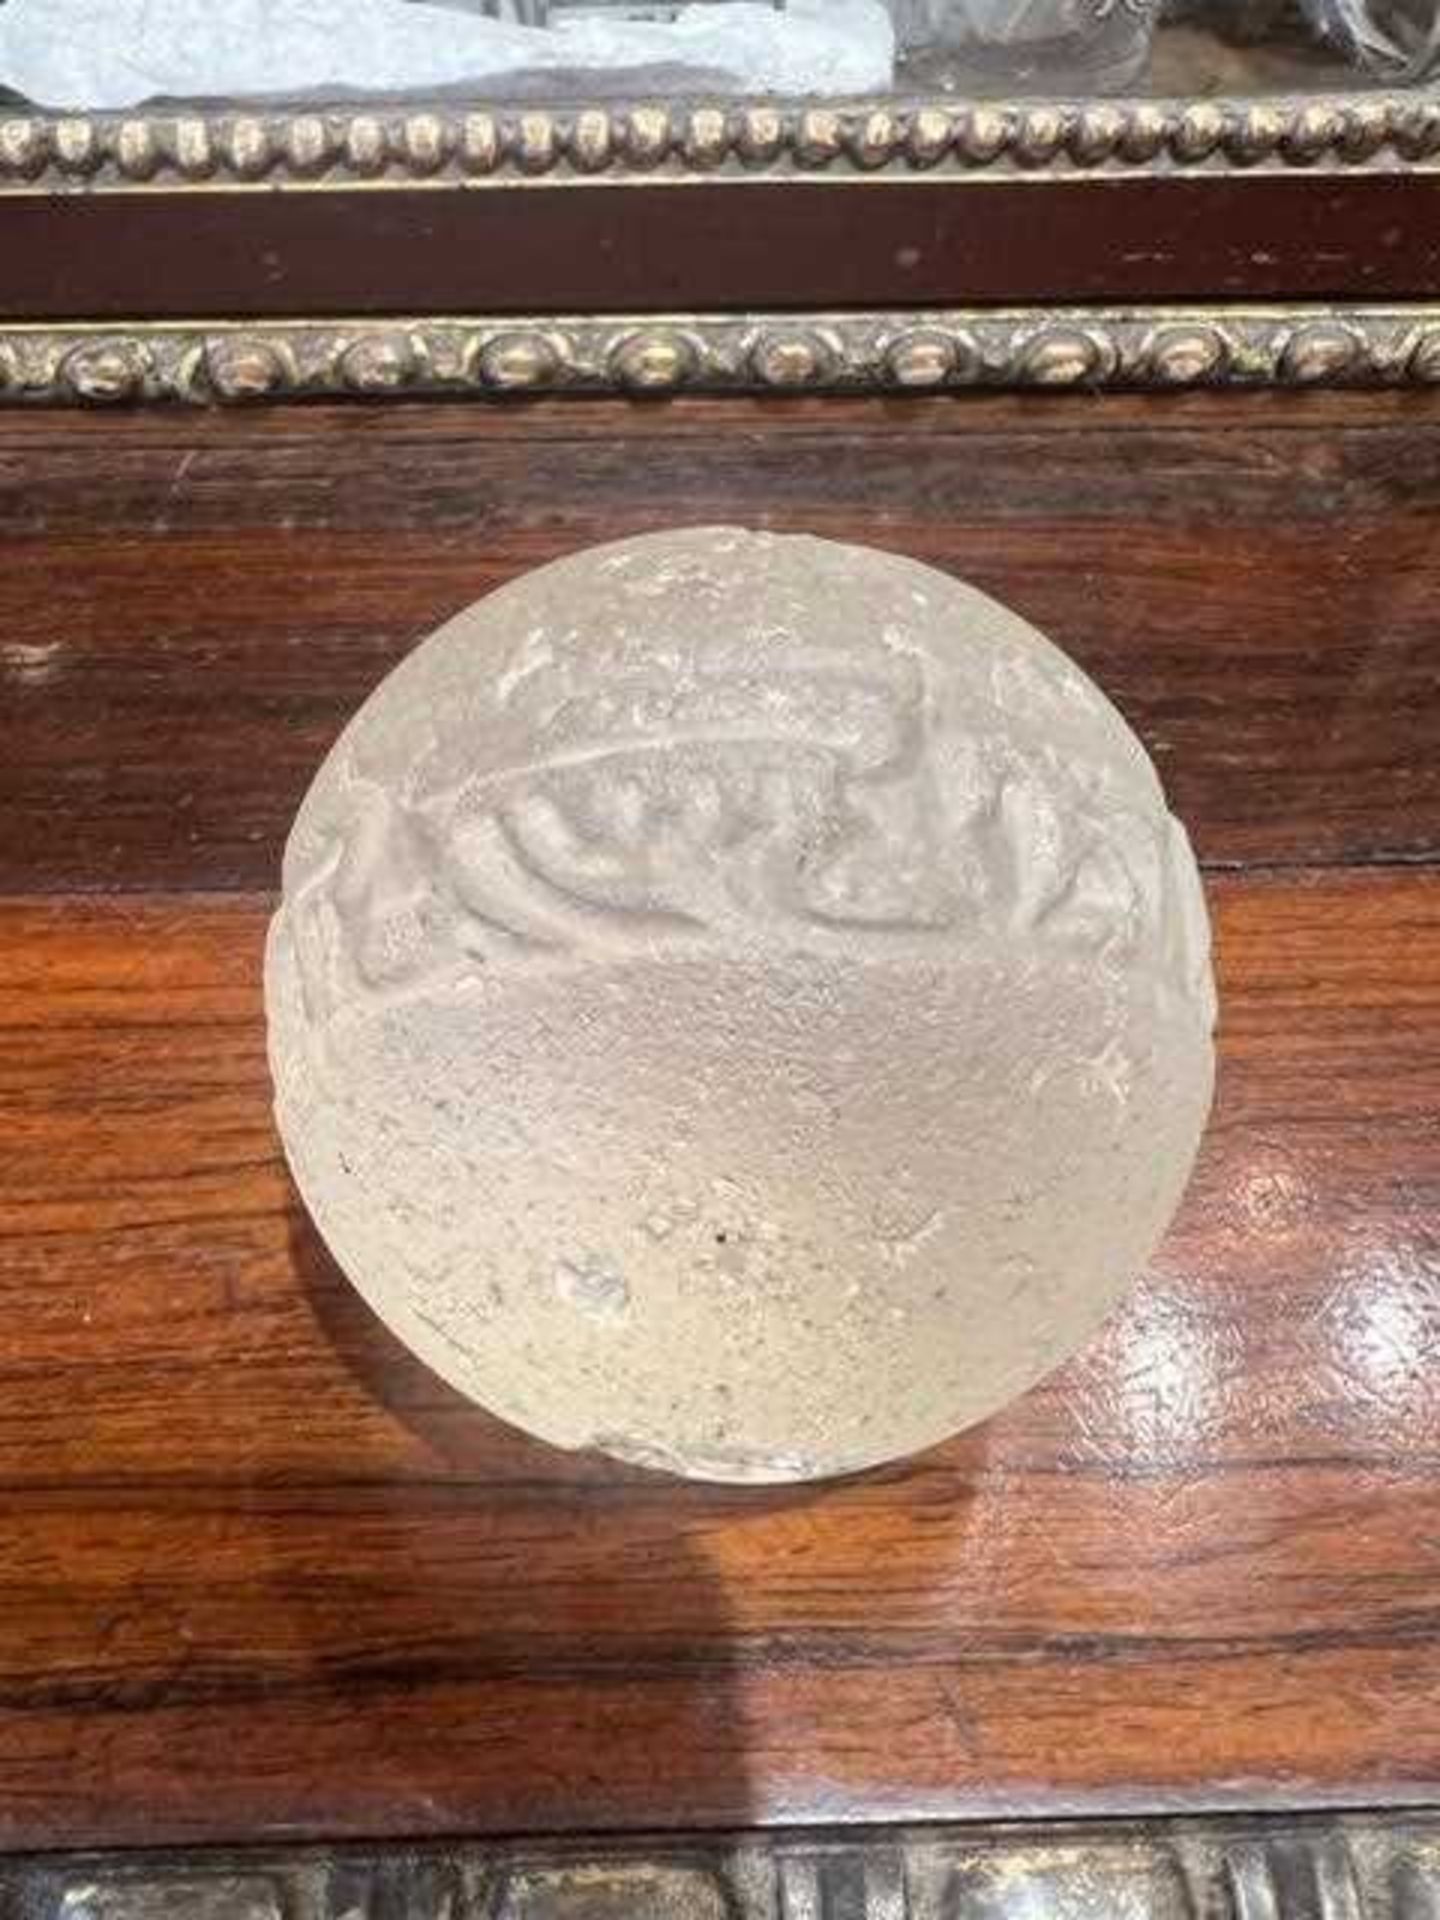 AN ISLAMIC SOLID GLASS SPHERE - Image 10 of 15